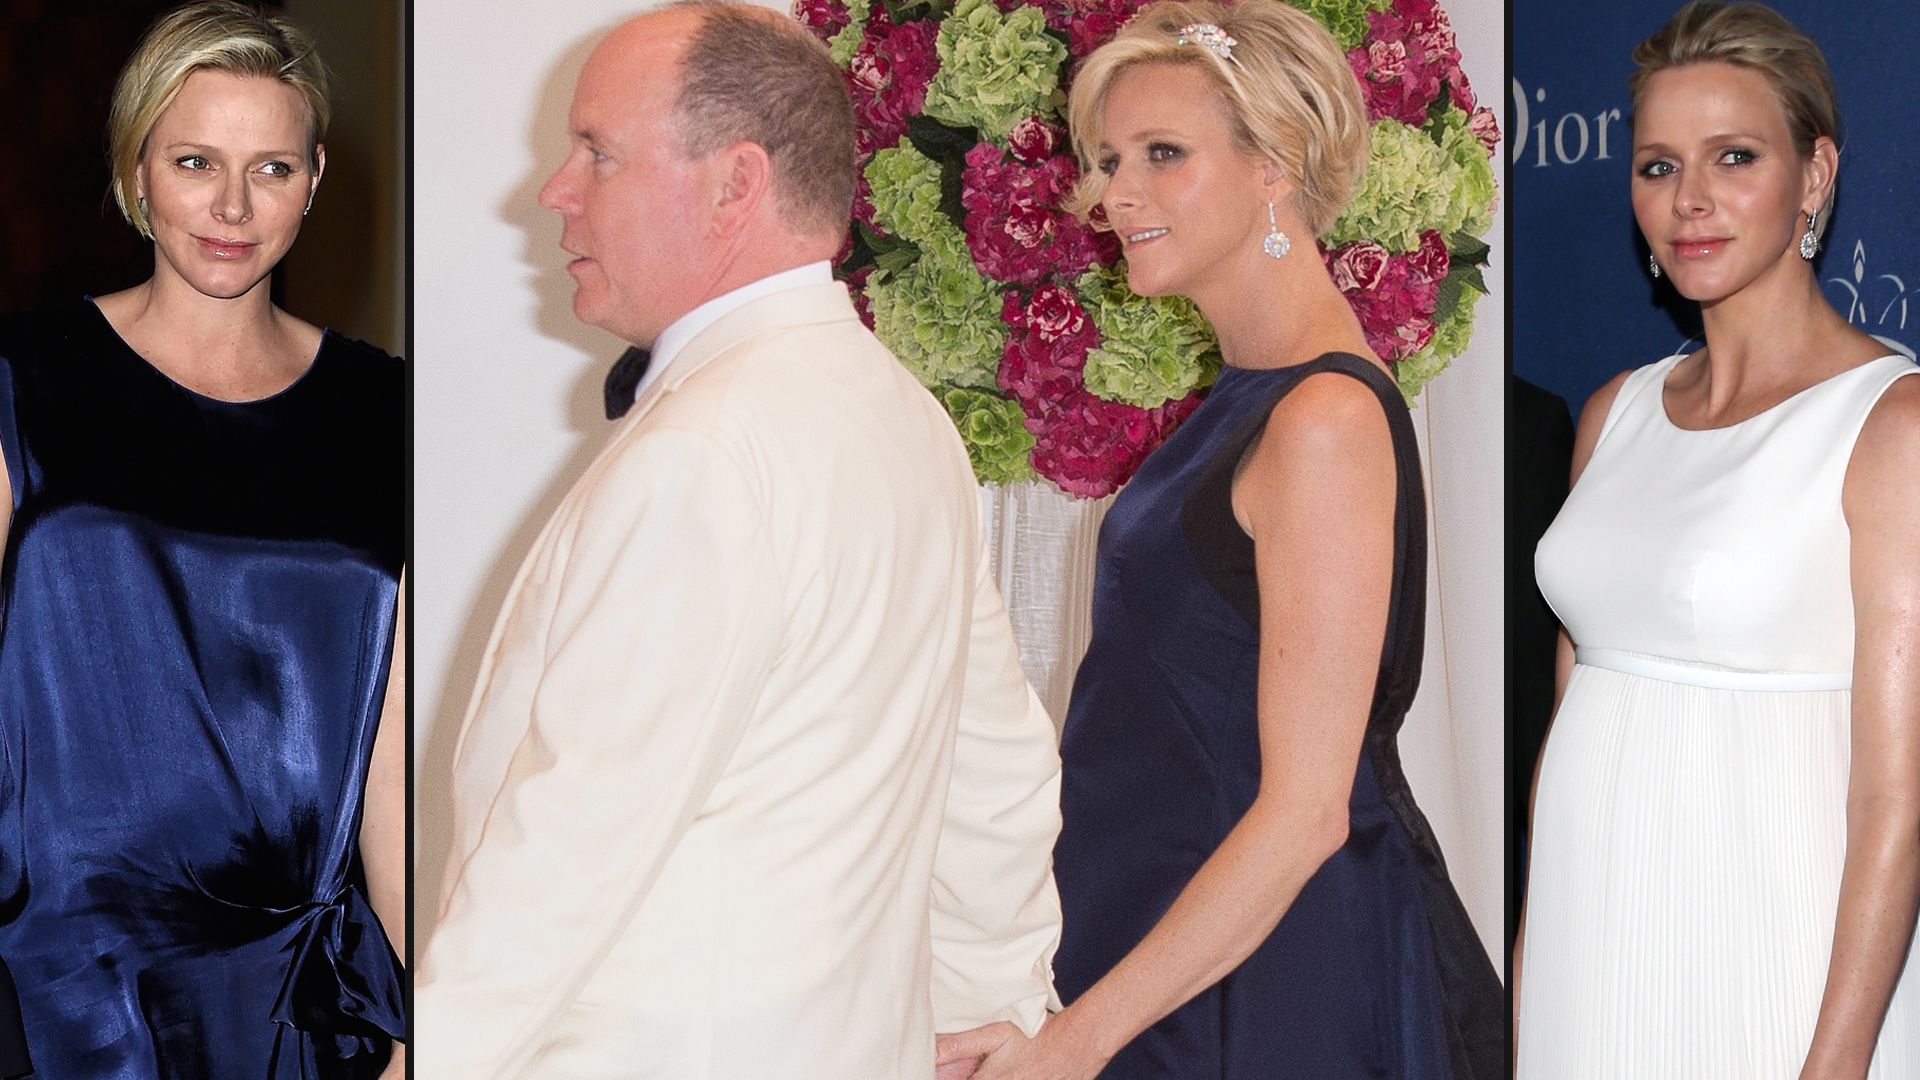 Princess Charlene showing off her baby bump in blue and white dresses